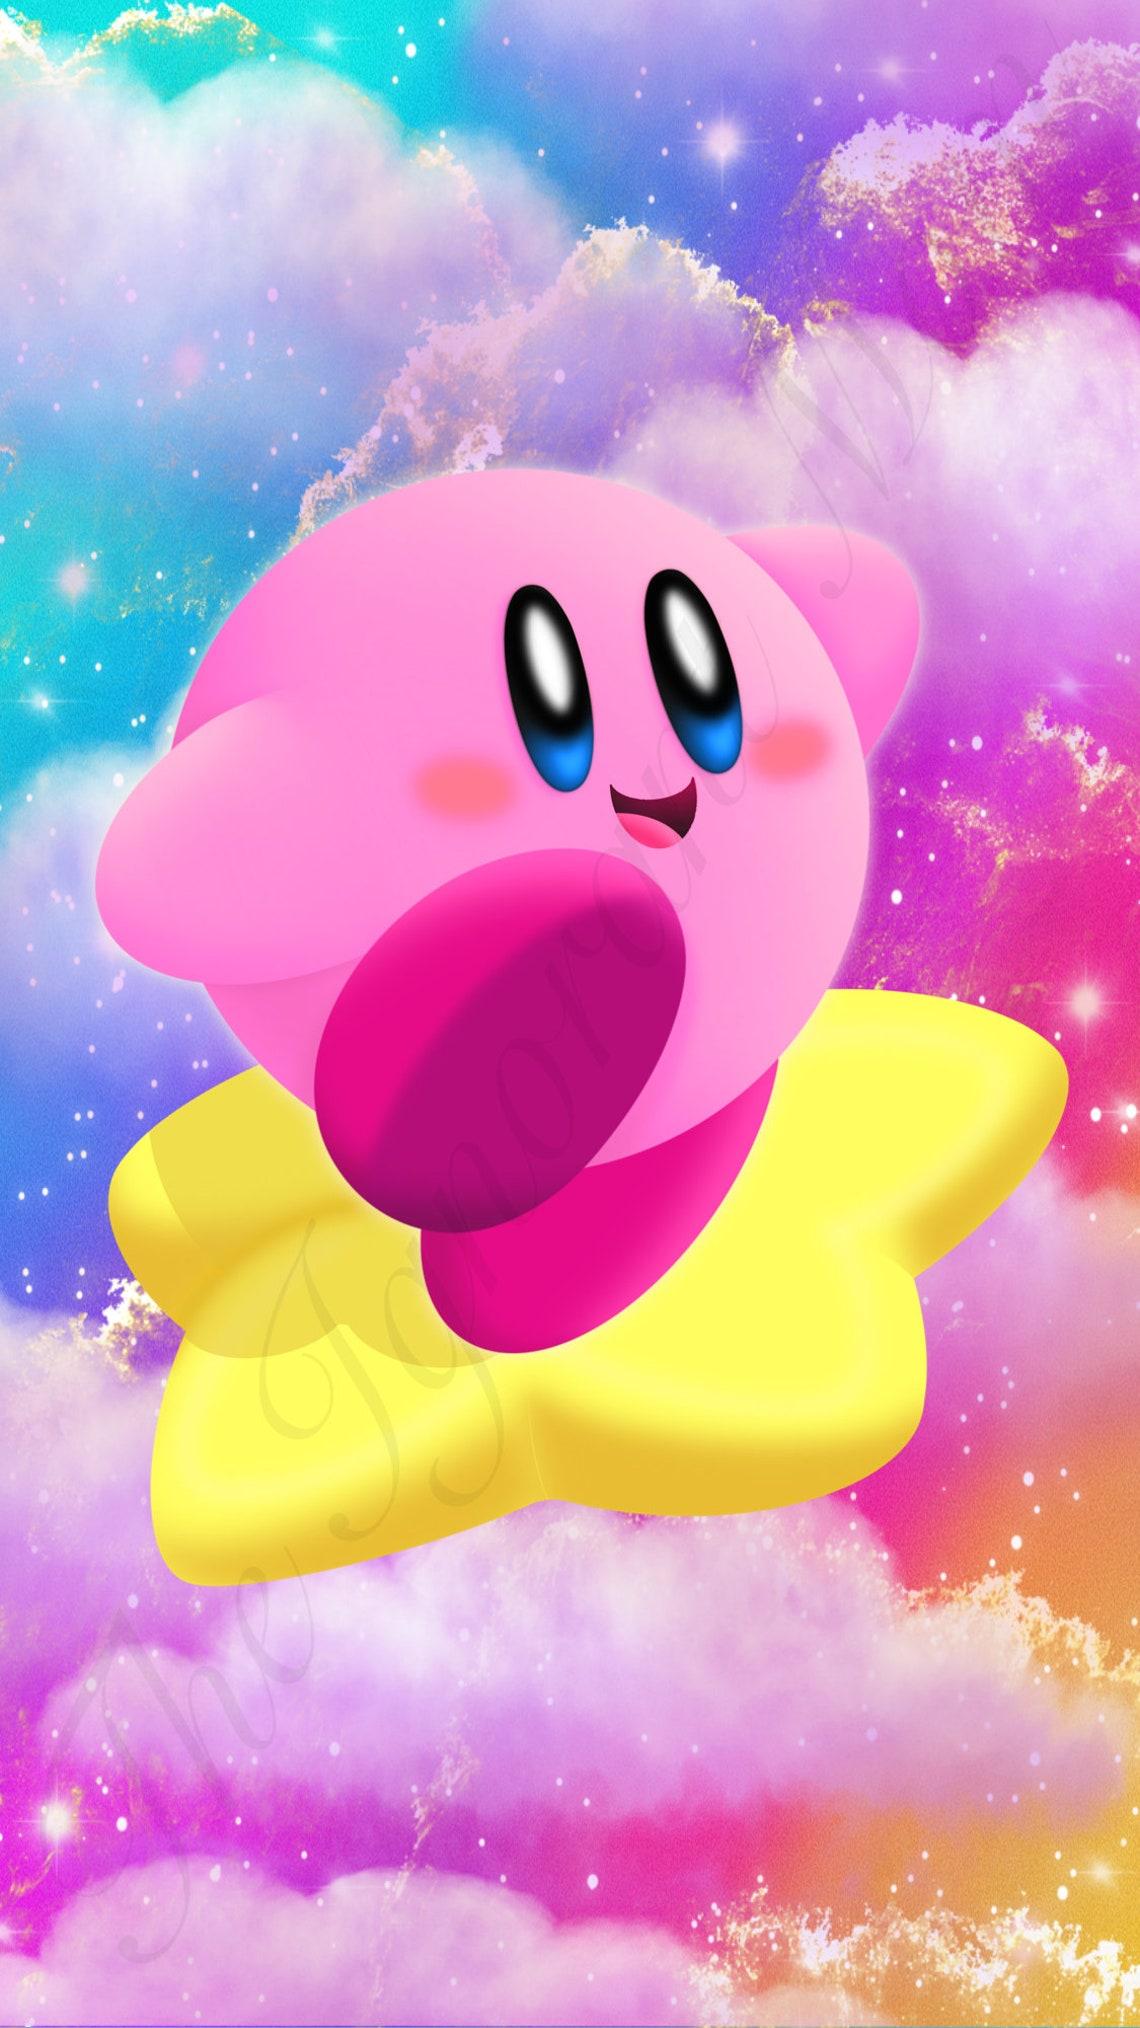 1140 x 2028 · jpeg - Kirby Iphone Android Wallpaper Digital Download | Etsy